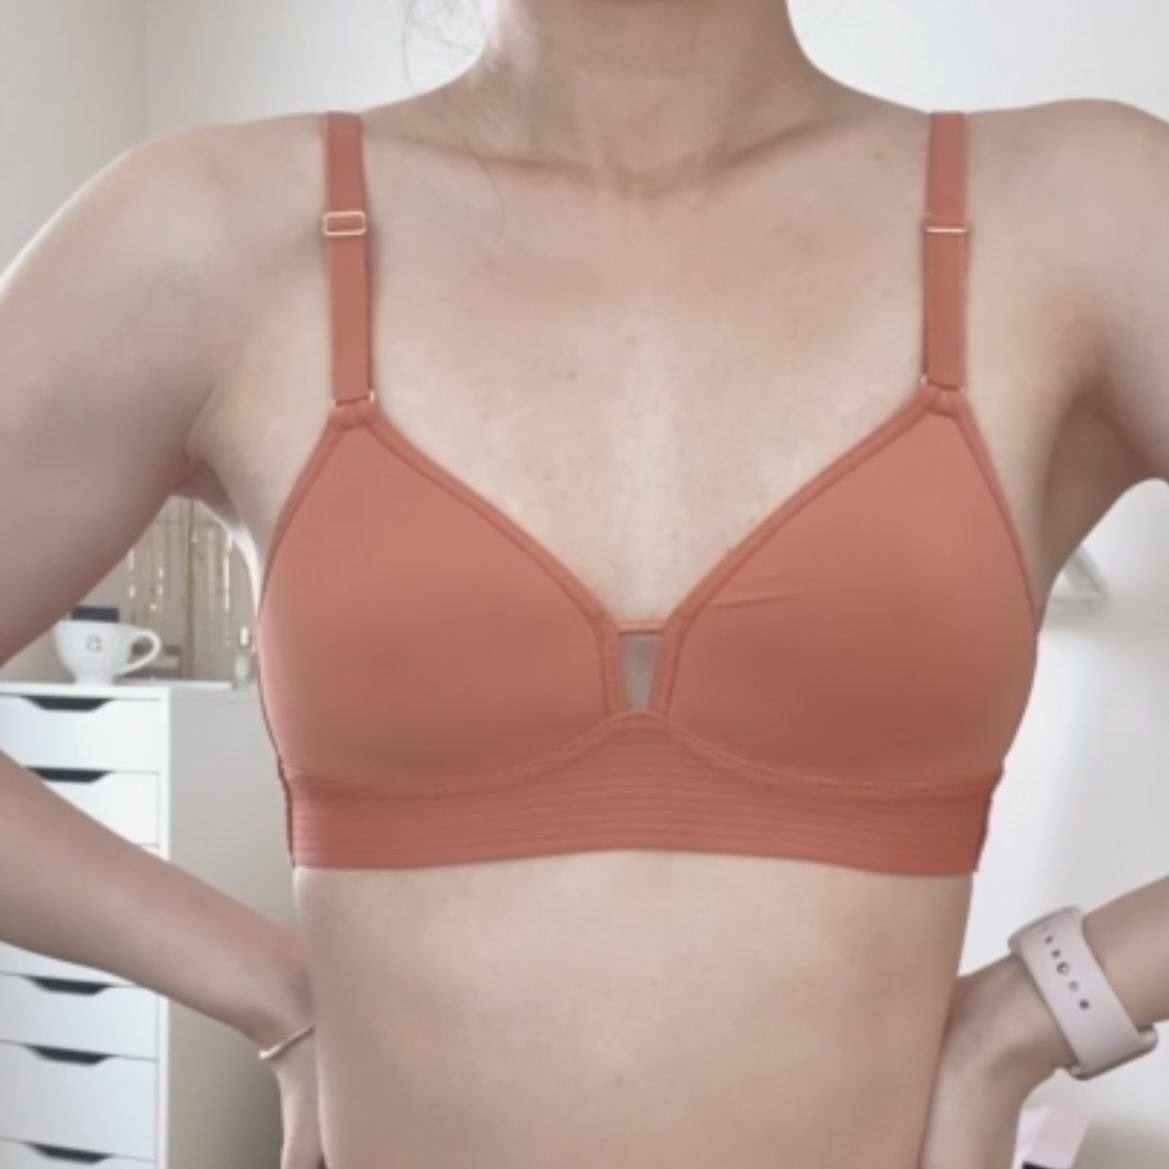 Aurola US on Instagram: Mercury Sports Bra 🚀 These bras took us more than  6 months to release. It is easy to make a bra but it's too hard to make it